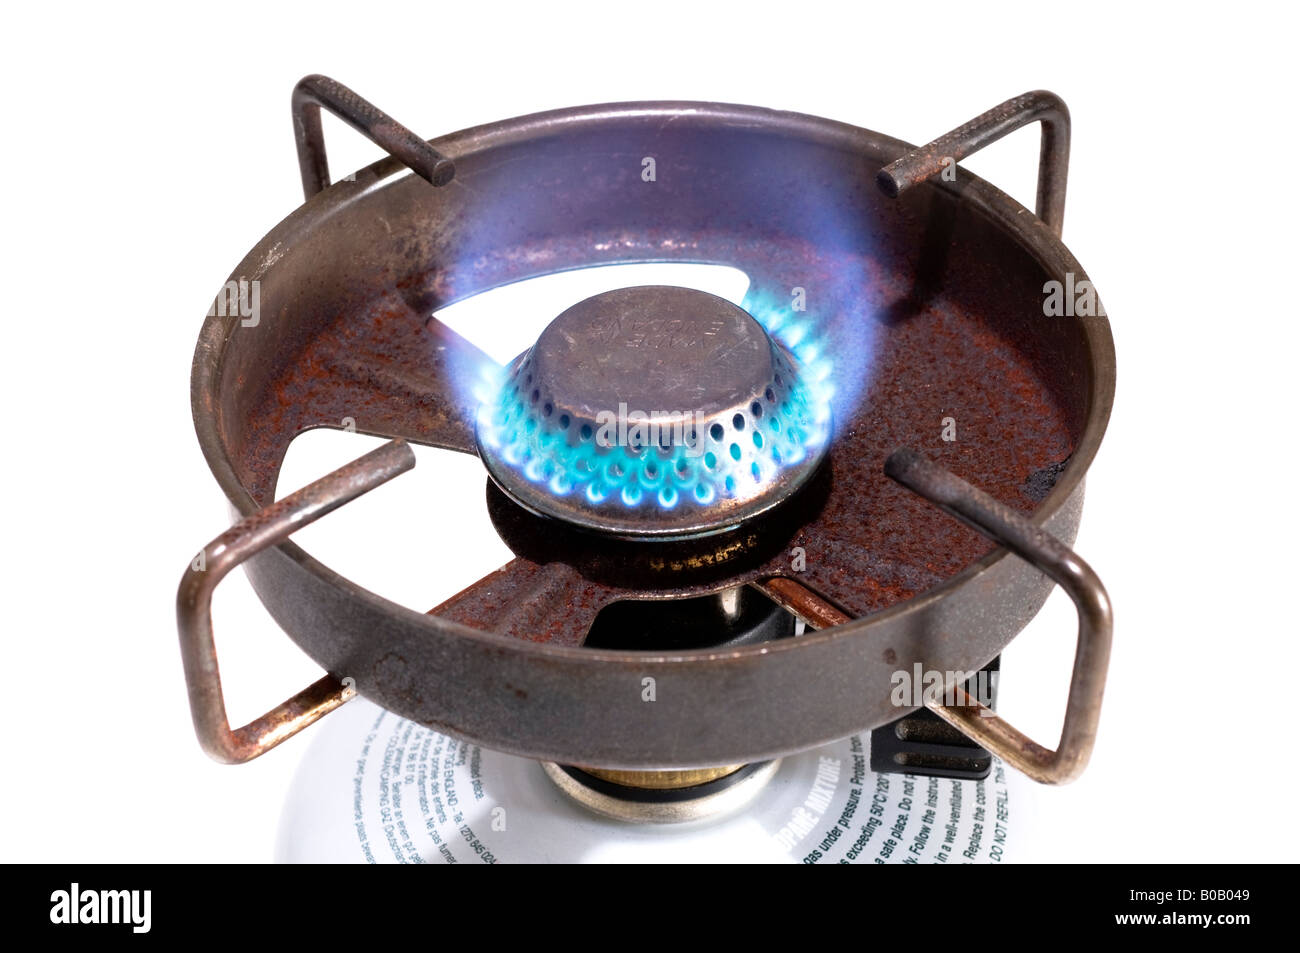 Small 1200w portable gas camping stove isolated on a white background Stock  Photo - Alamy